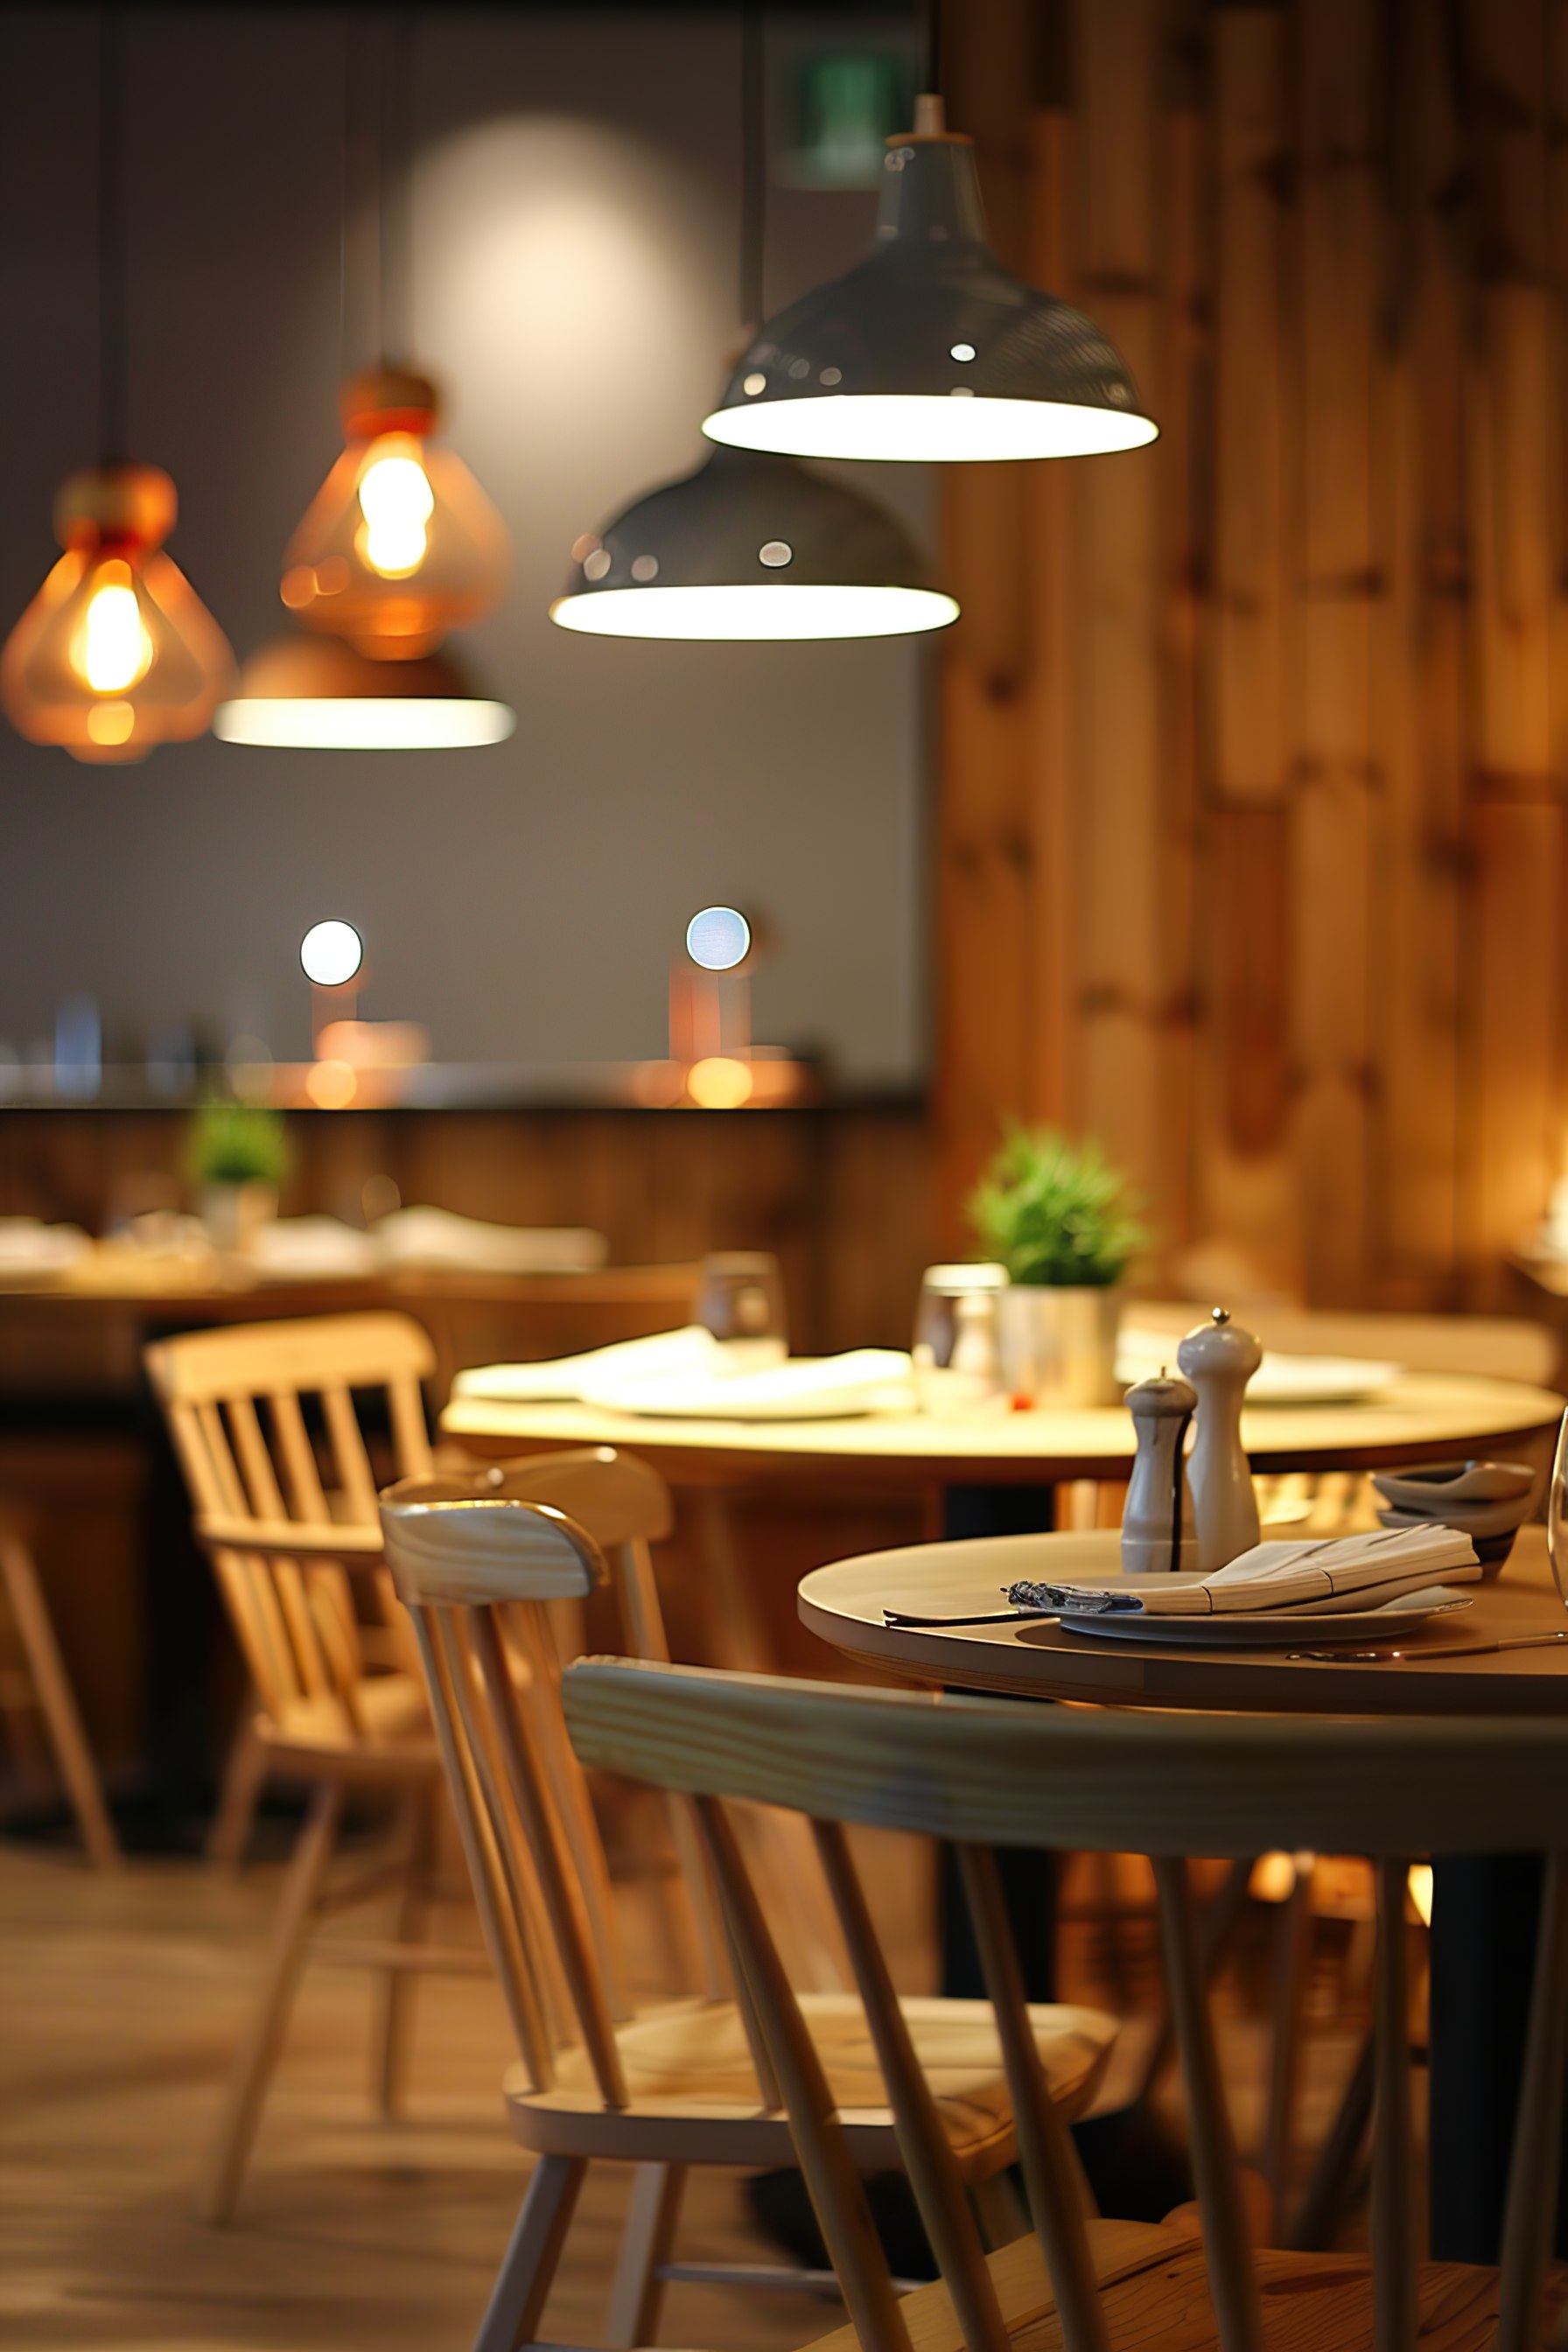 Warmly lit restaurant interior with hanging pendant lights, wooden chairs, and set tables creating a cozy ambiance.